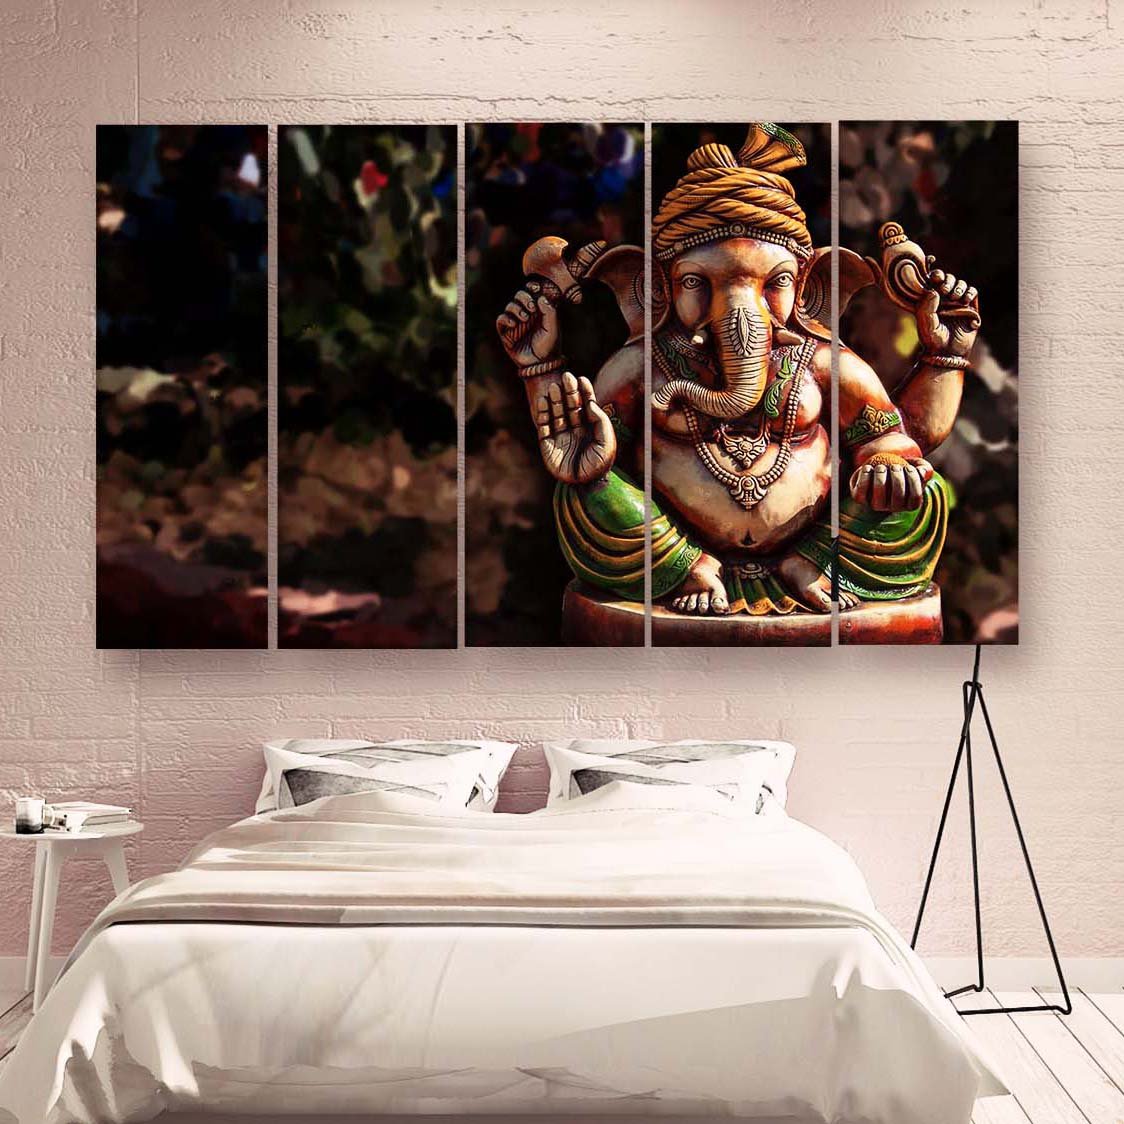 Casperme Lord Ganesha Wall Painting For Living Room for Bedroom, Hotels & Office Decoration (48×30 inhes)